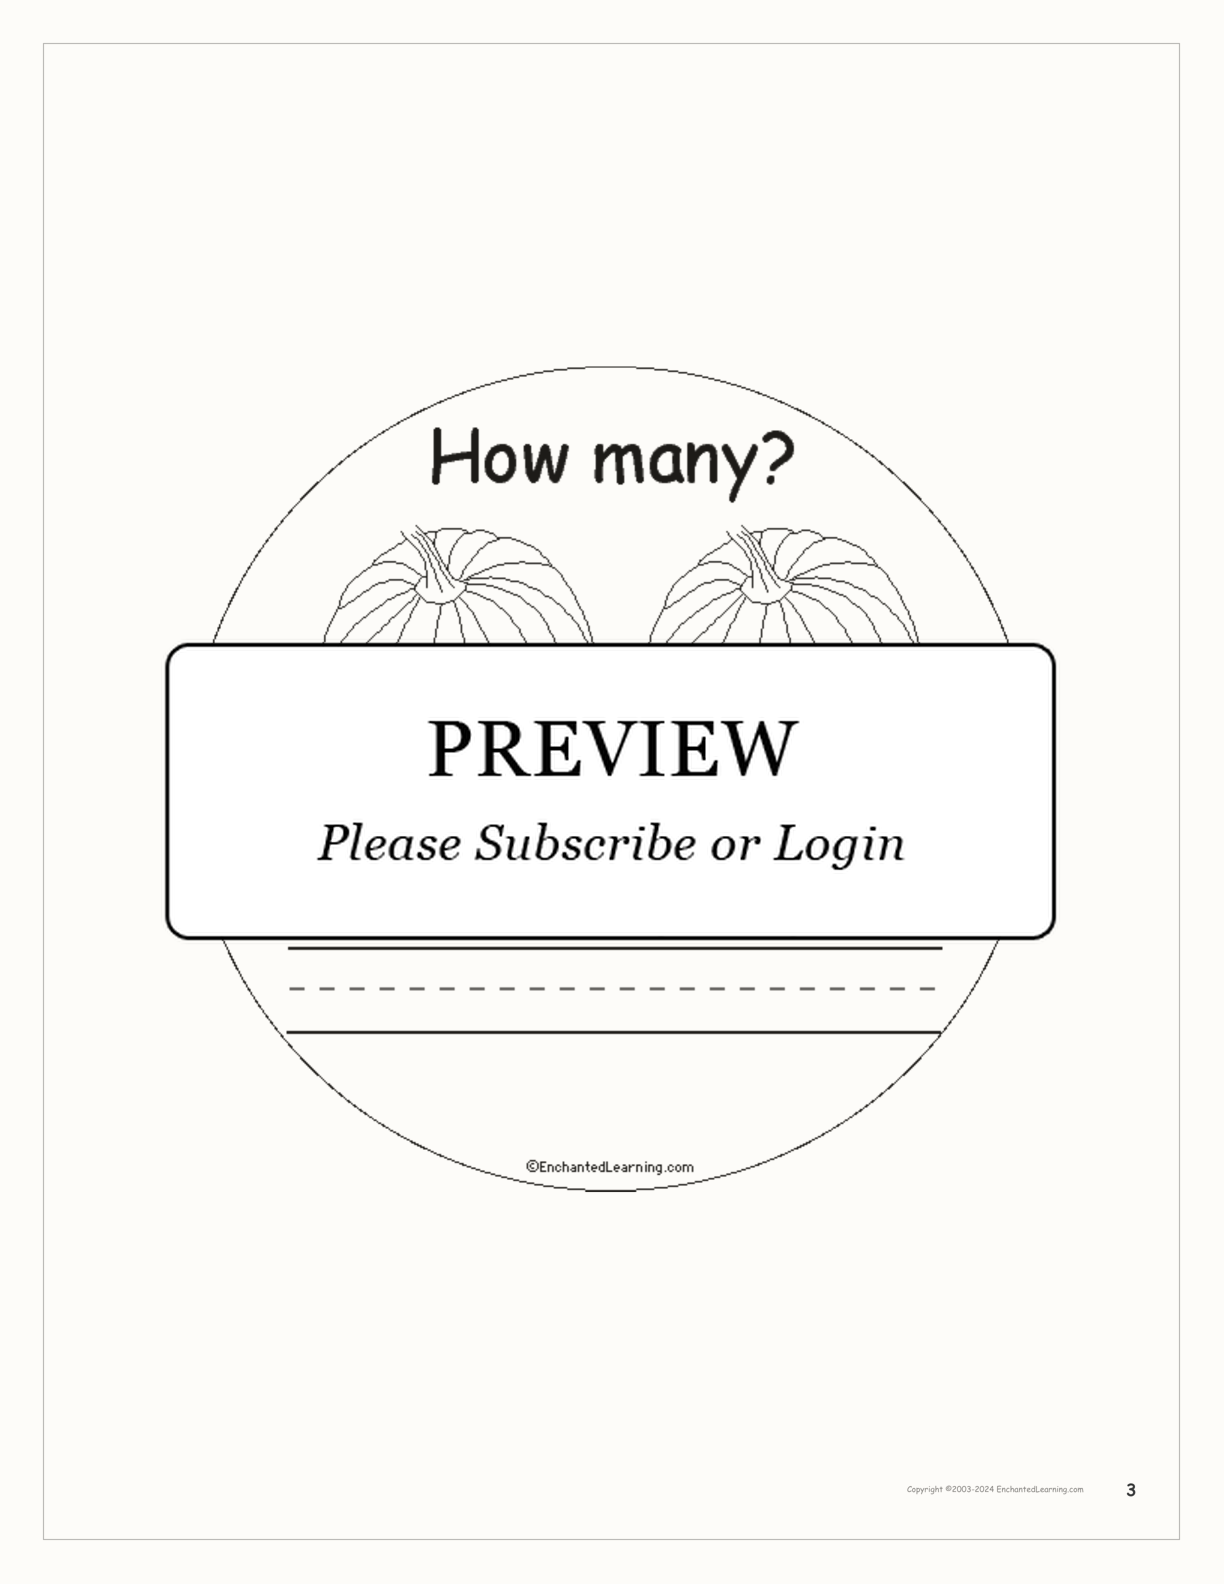 How Many Pumpkins? interactive printout page 3